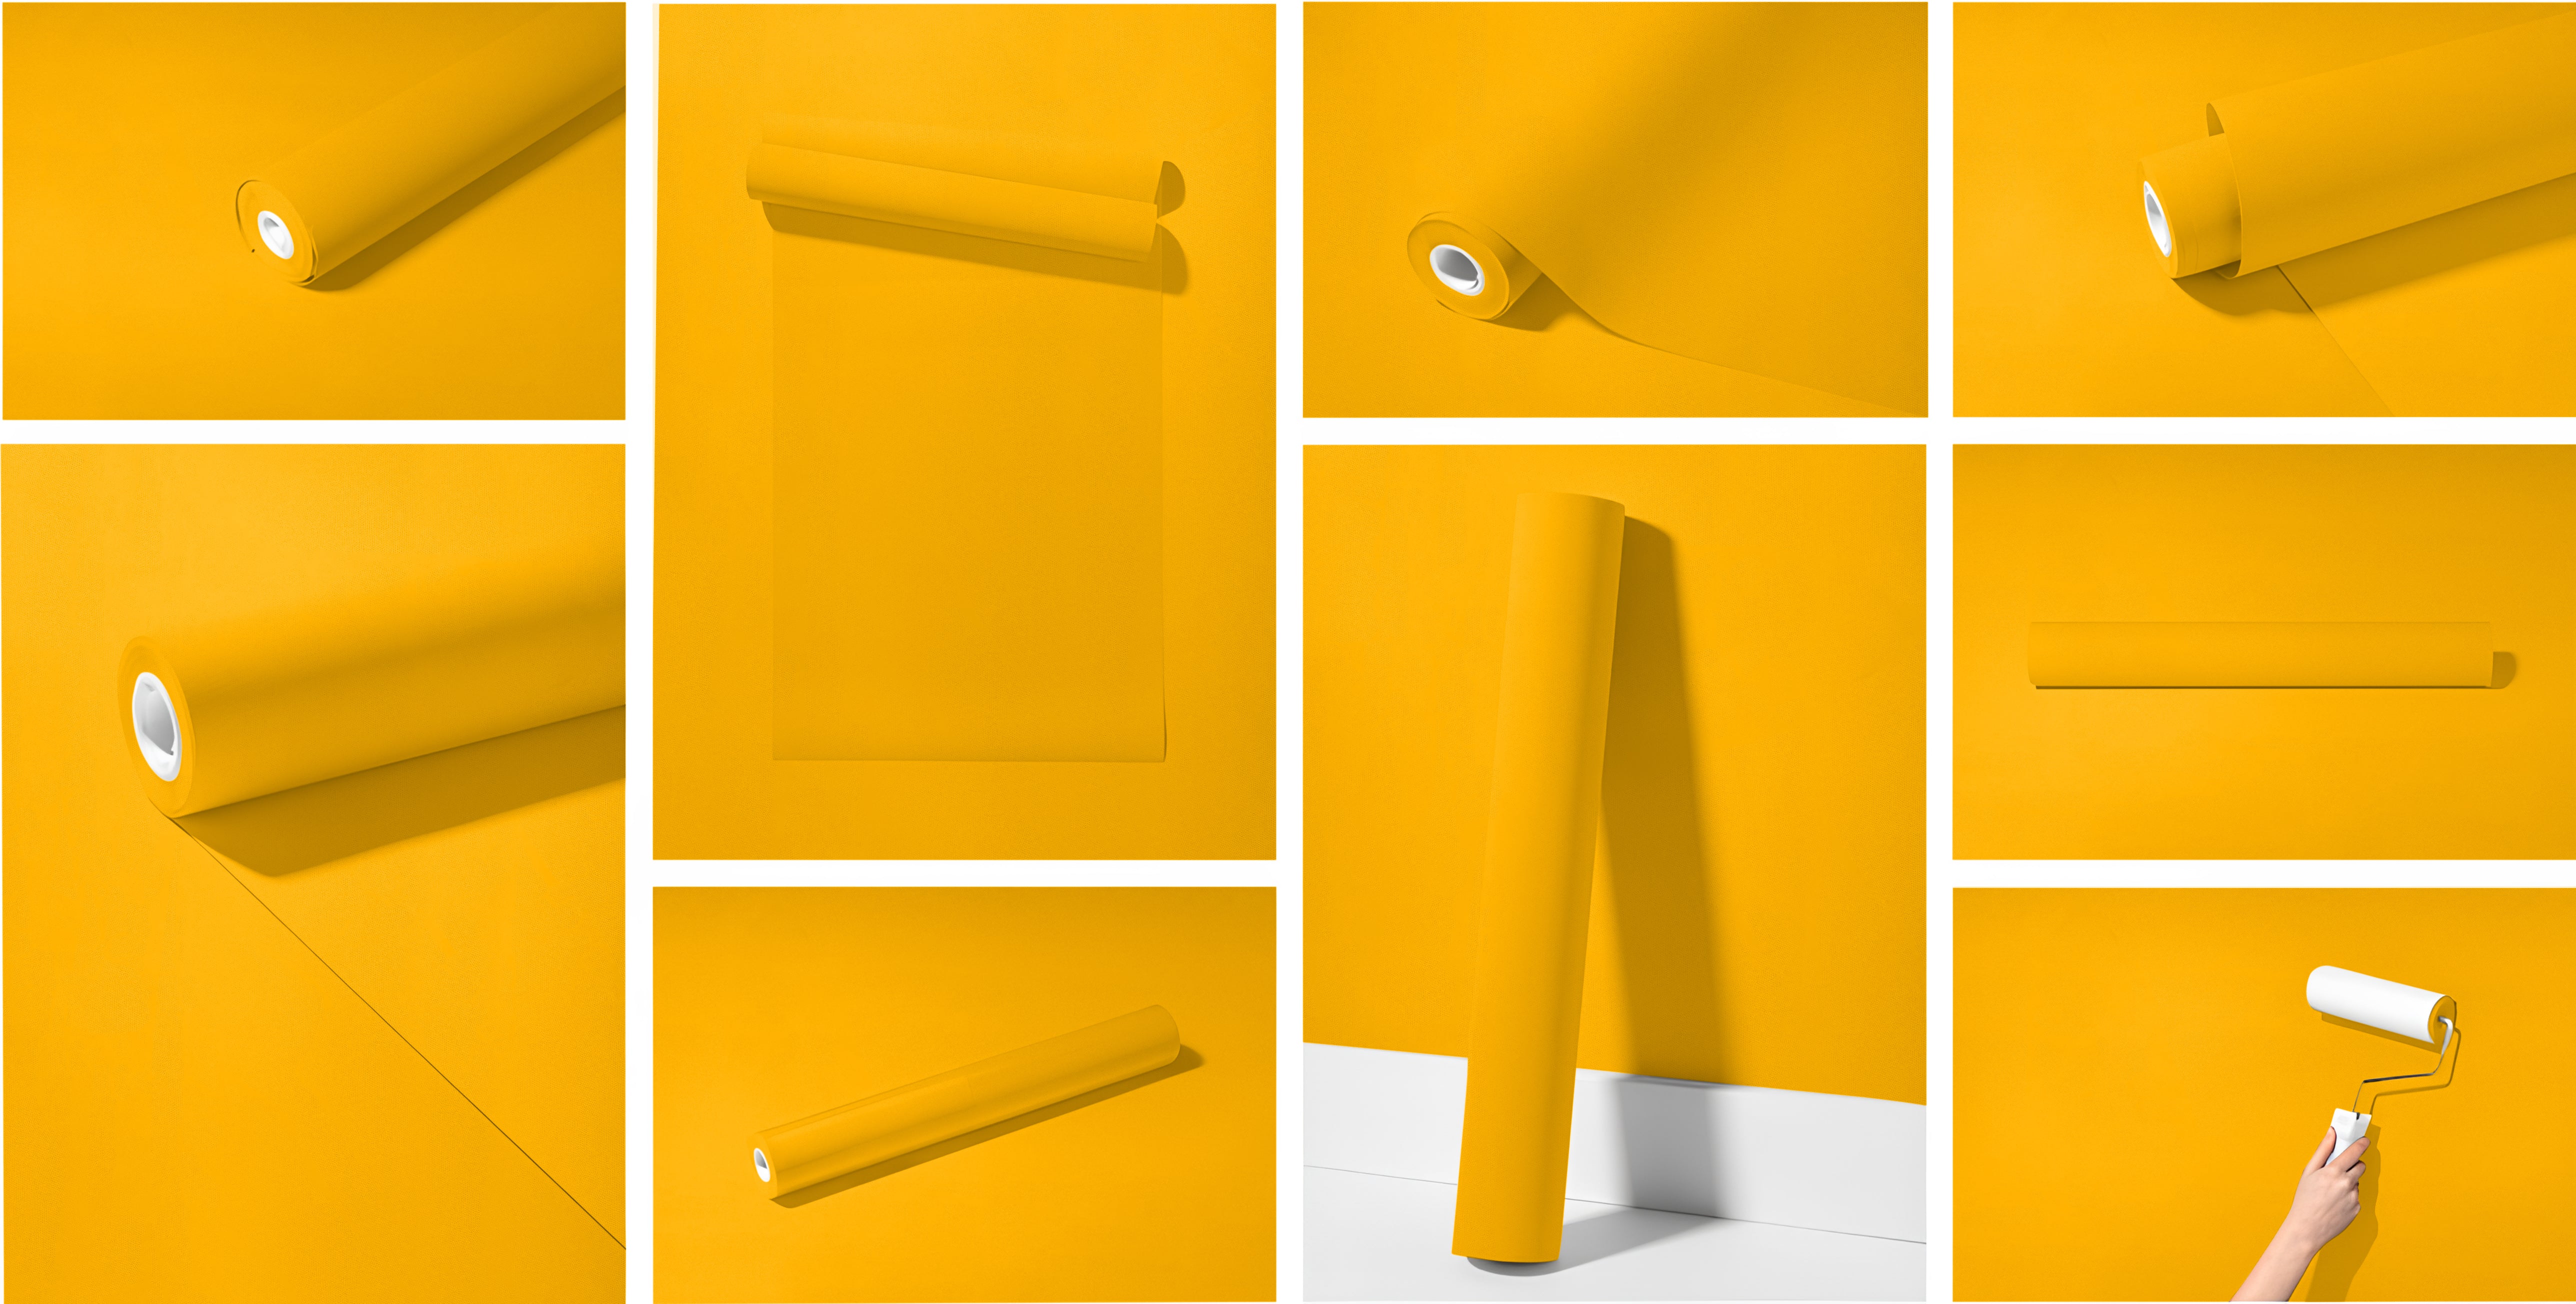 Peel & Stick Removable Re-usable Paint - Color RAL 2007 Luminous Bright Orange - offRAL™ - RALRAW LLC, USA